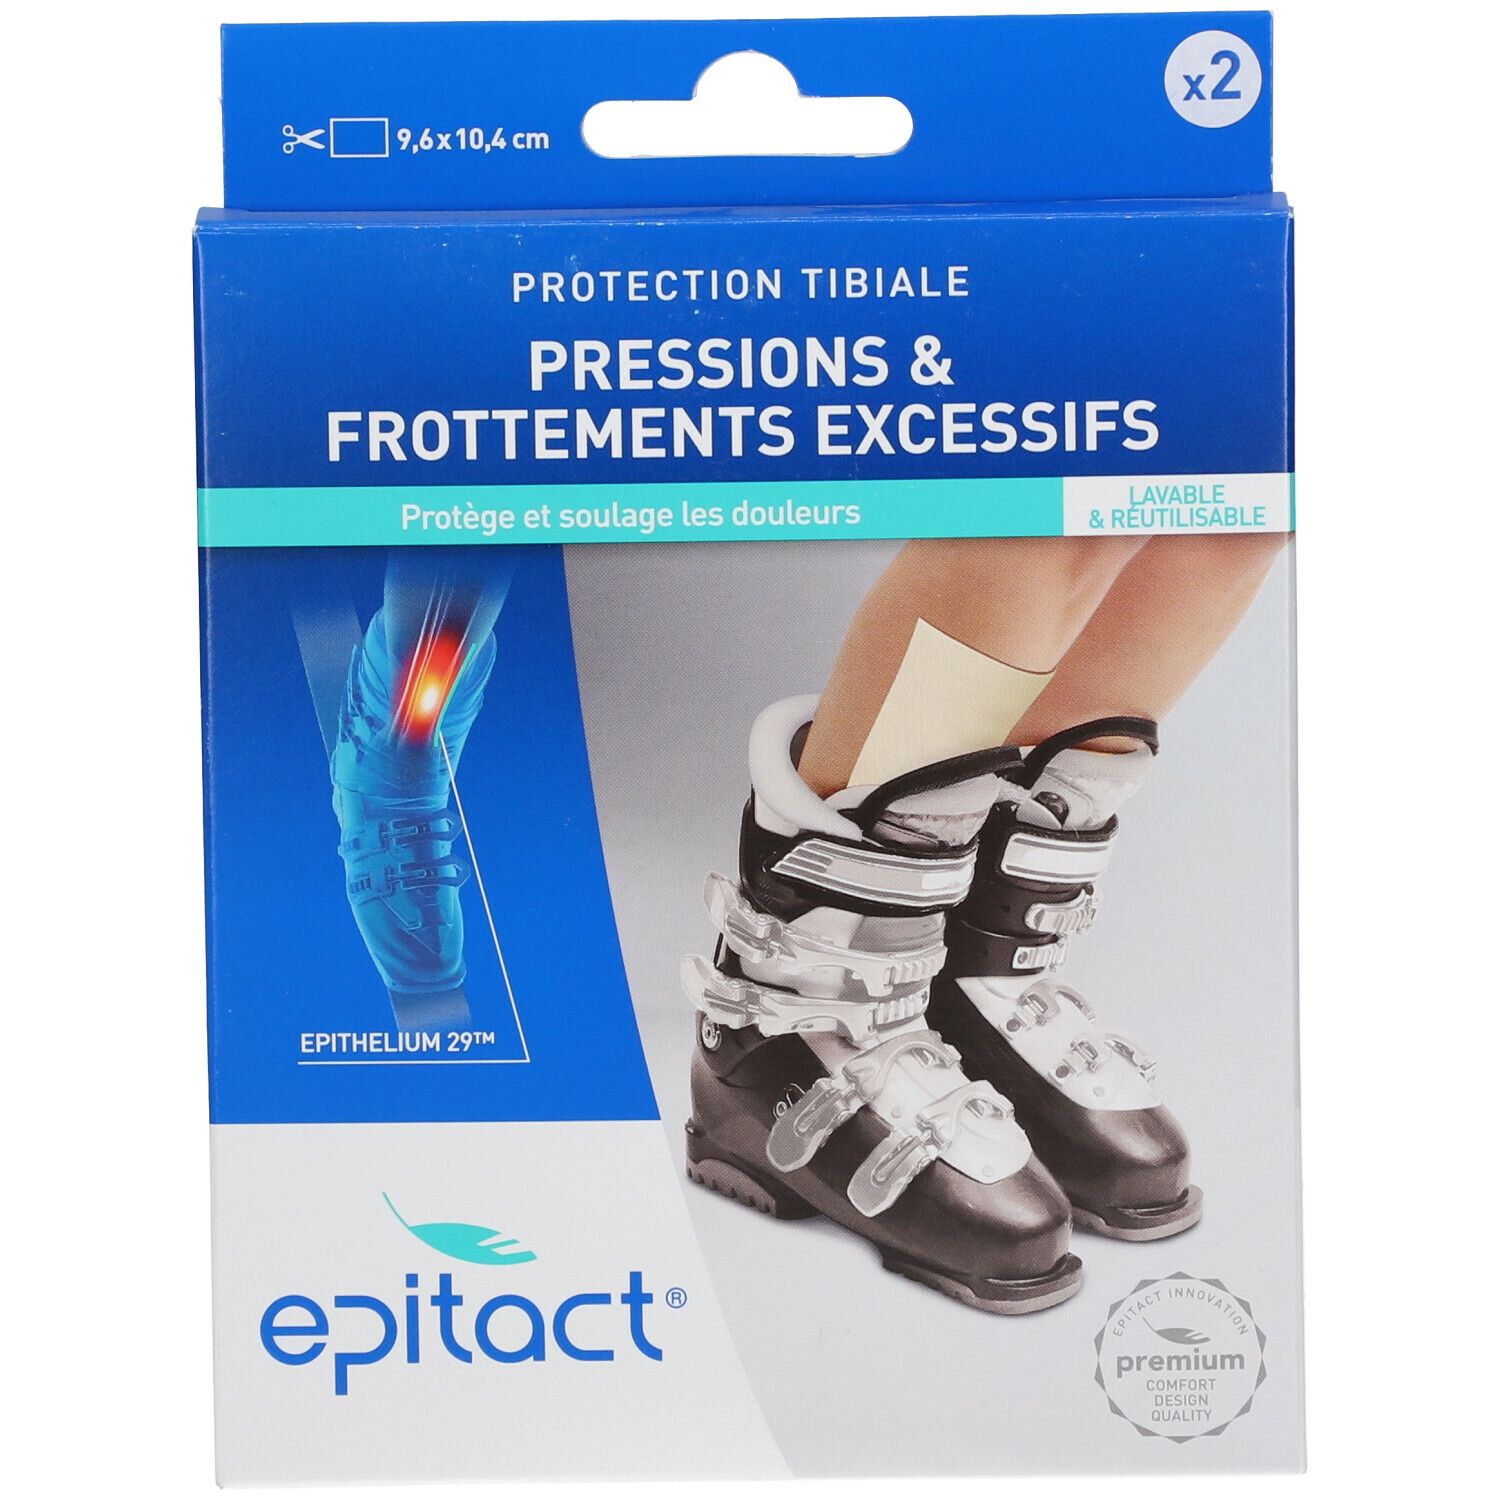 epitact® Protections tibiales